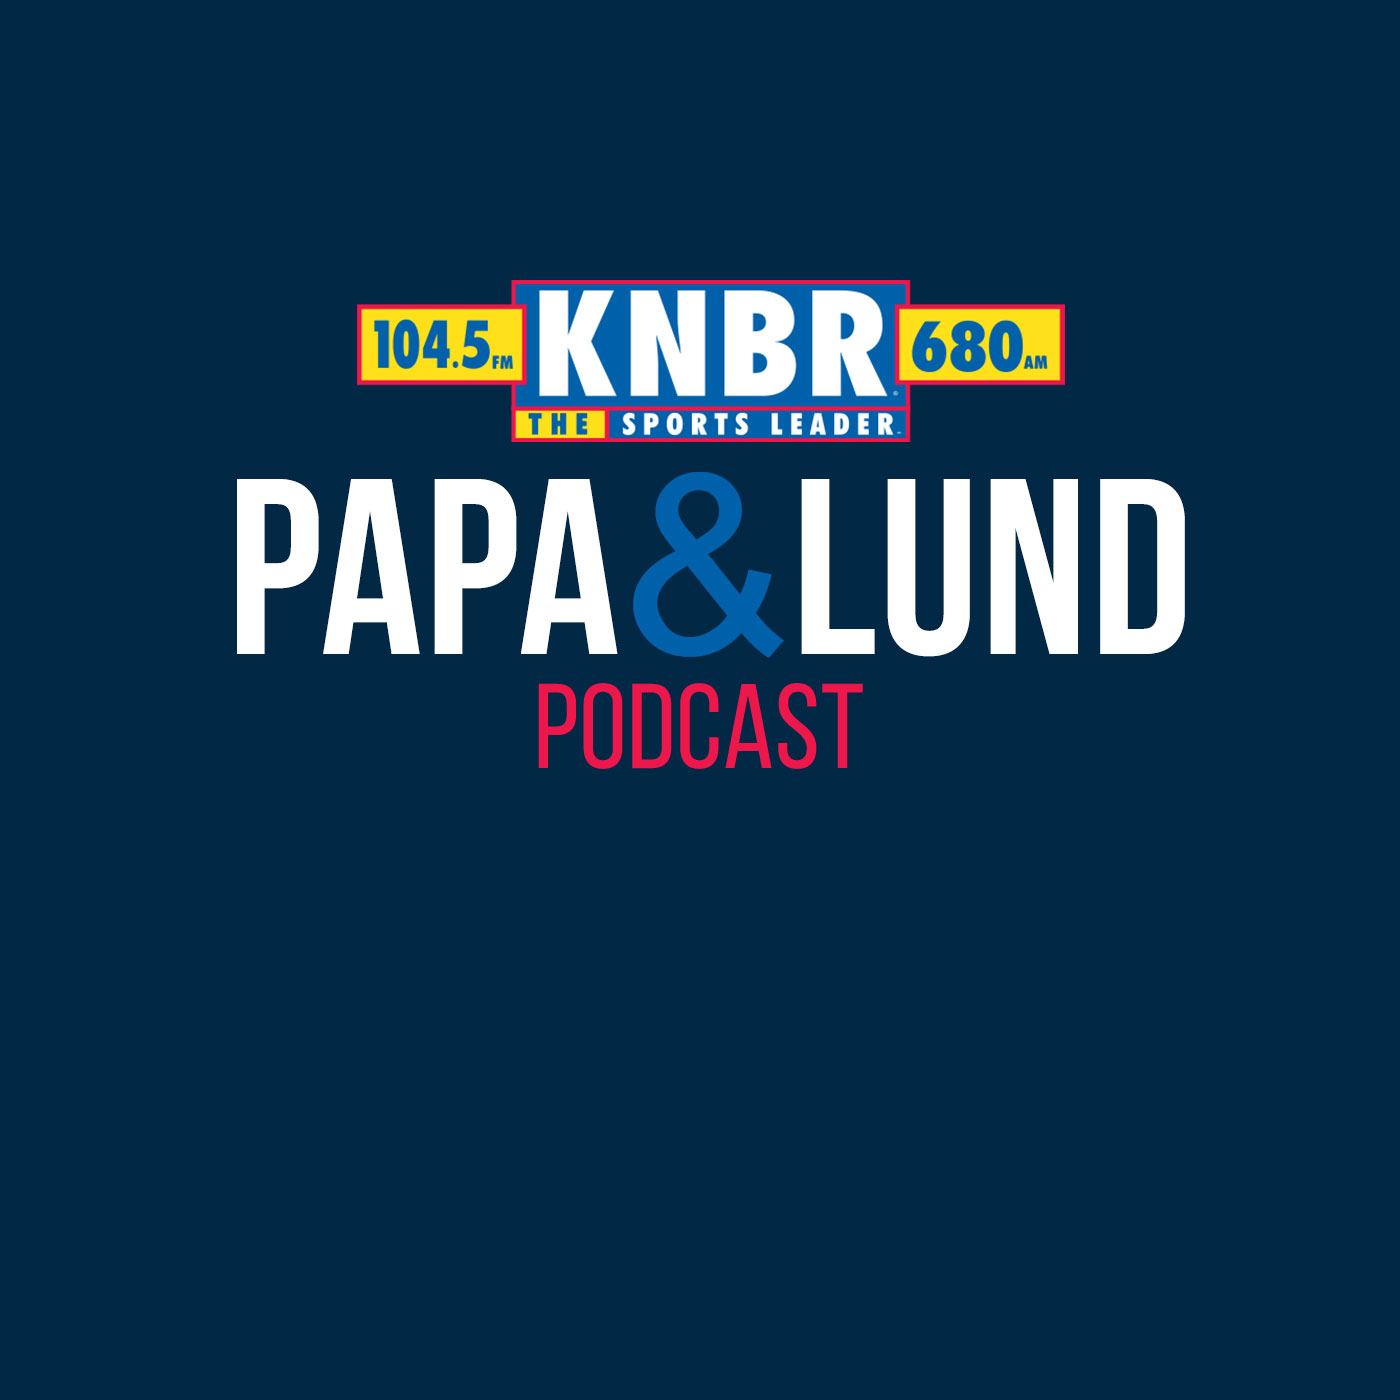 10-28 Warriors Insider Monte Poole joins Papa & Lund: Nobody has had a bigger impact on Bay Area sports more than Steph Curry